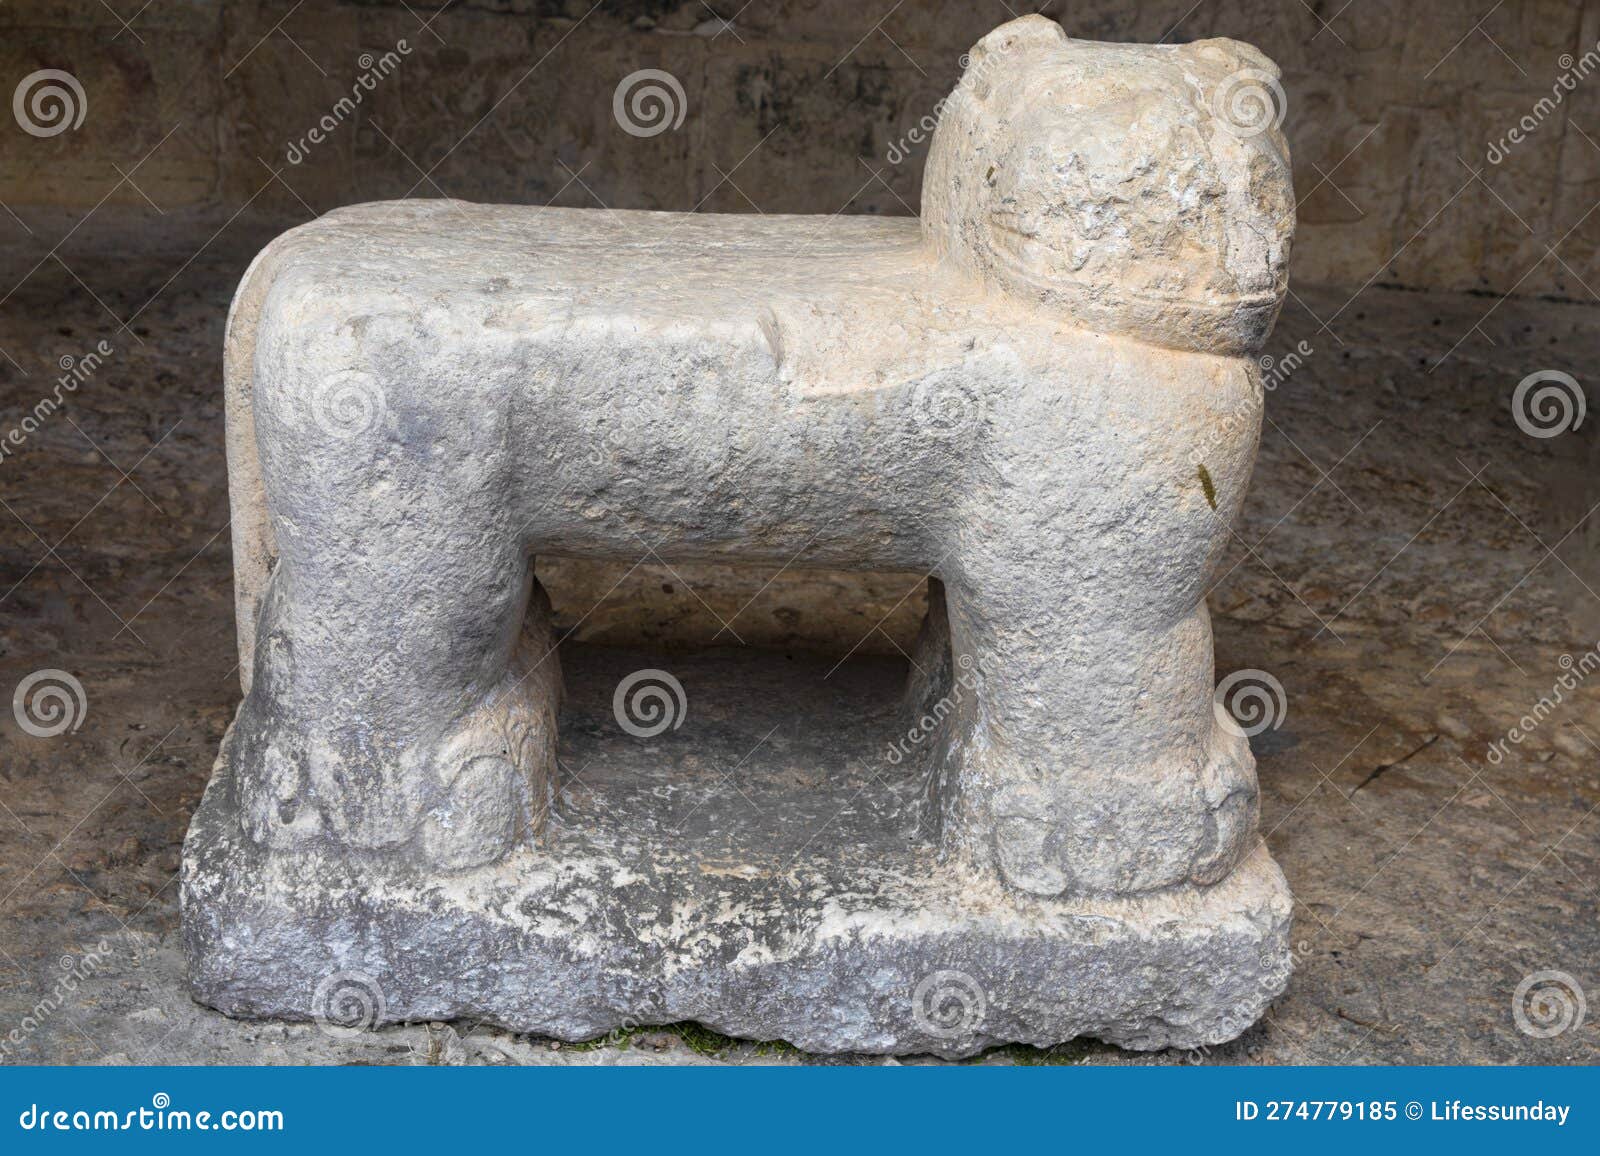 a statue known as a chacmool from the mayan ruins of chichen itza in the yucatan peninsula